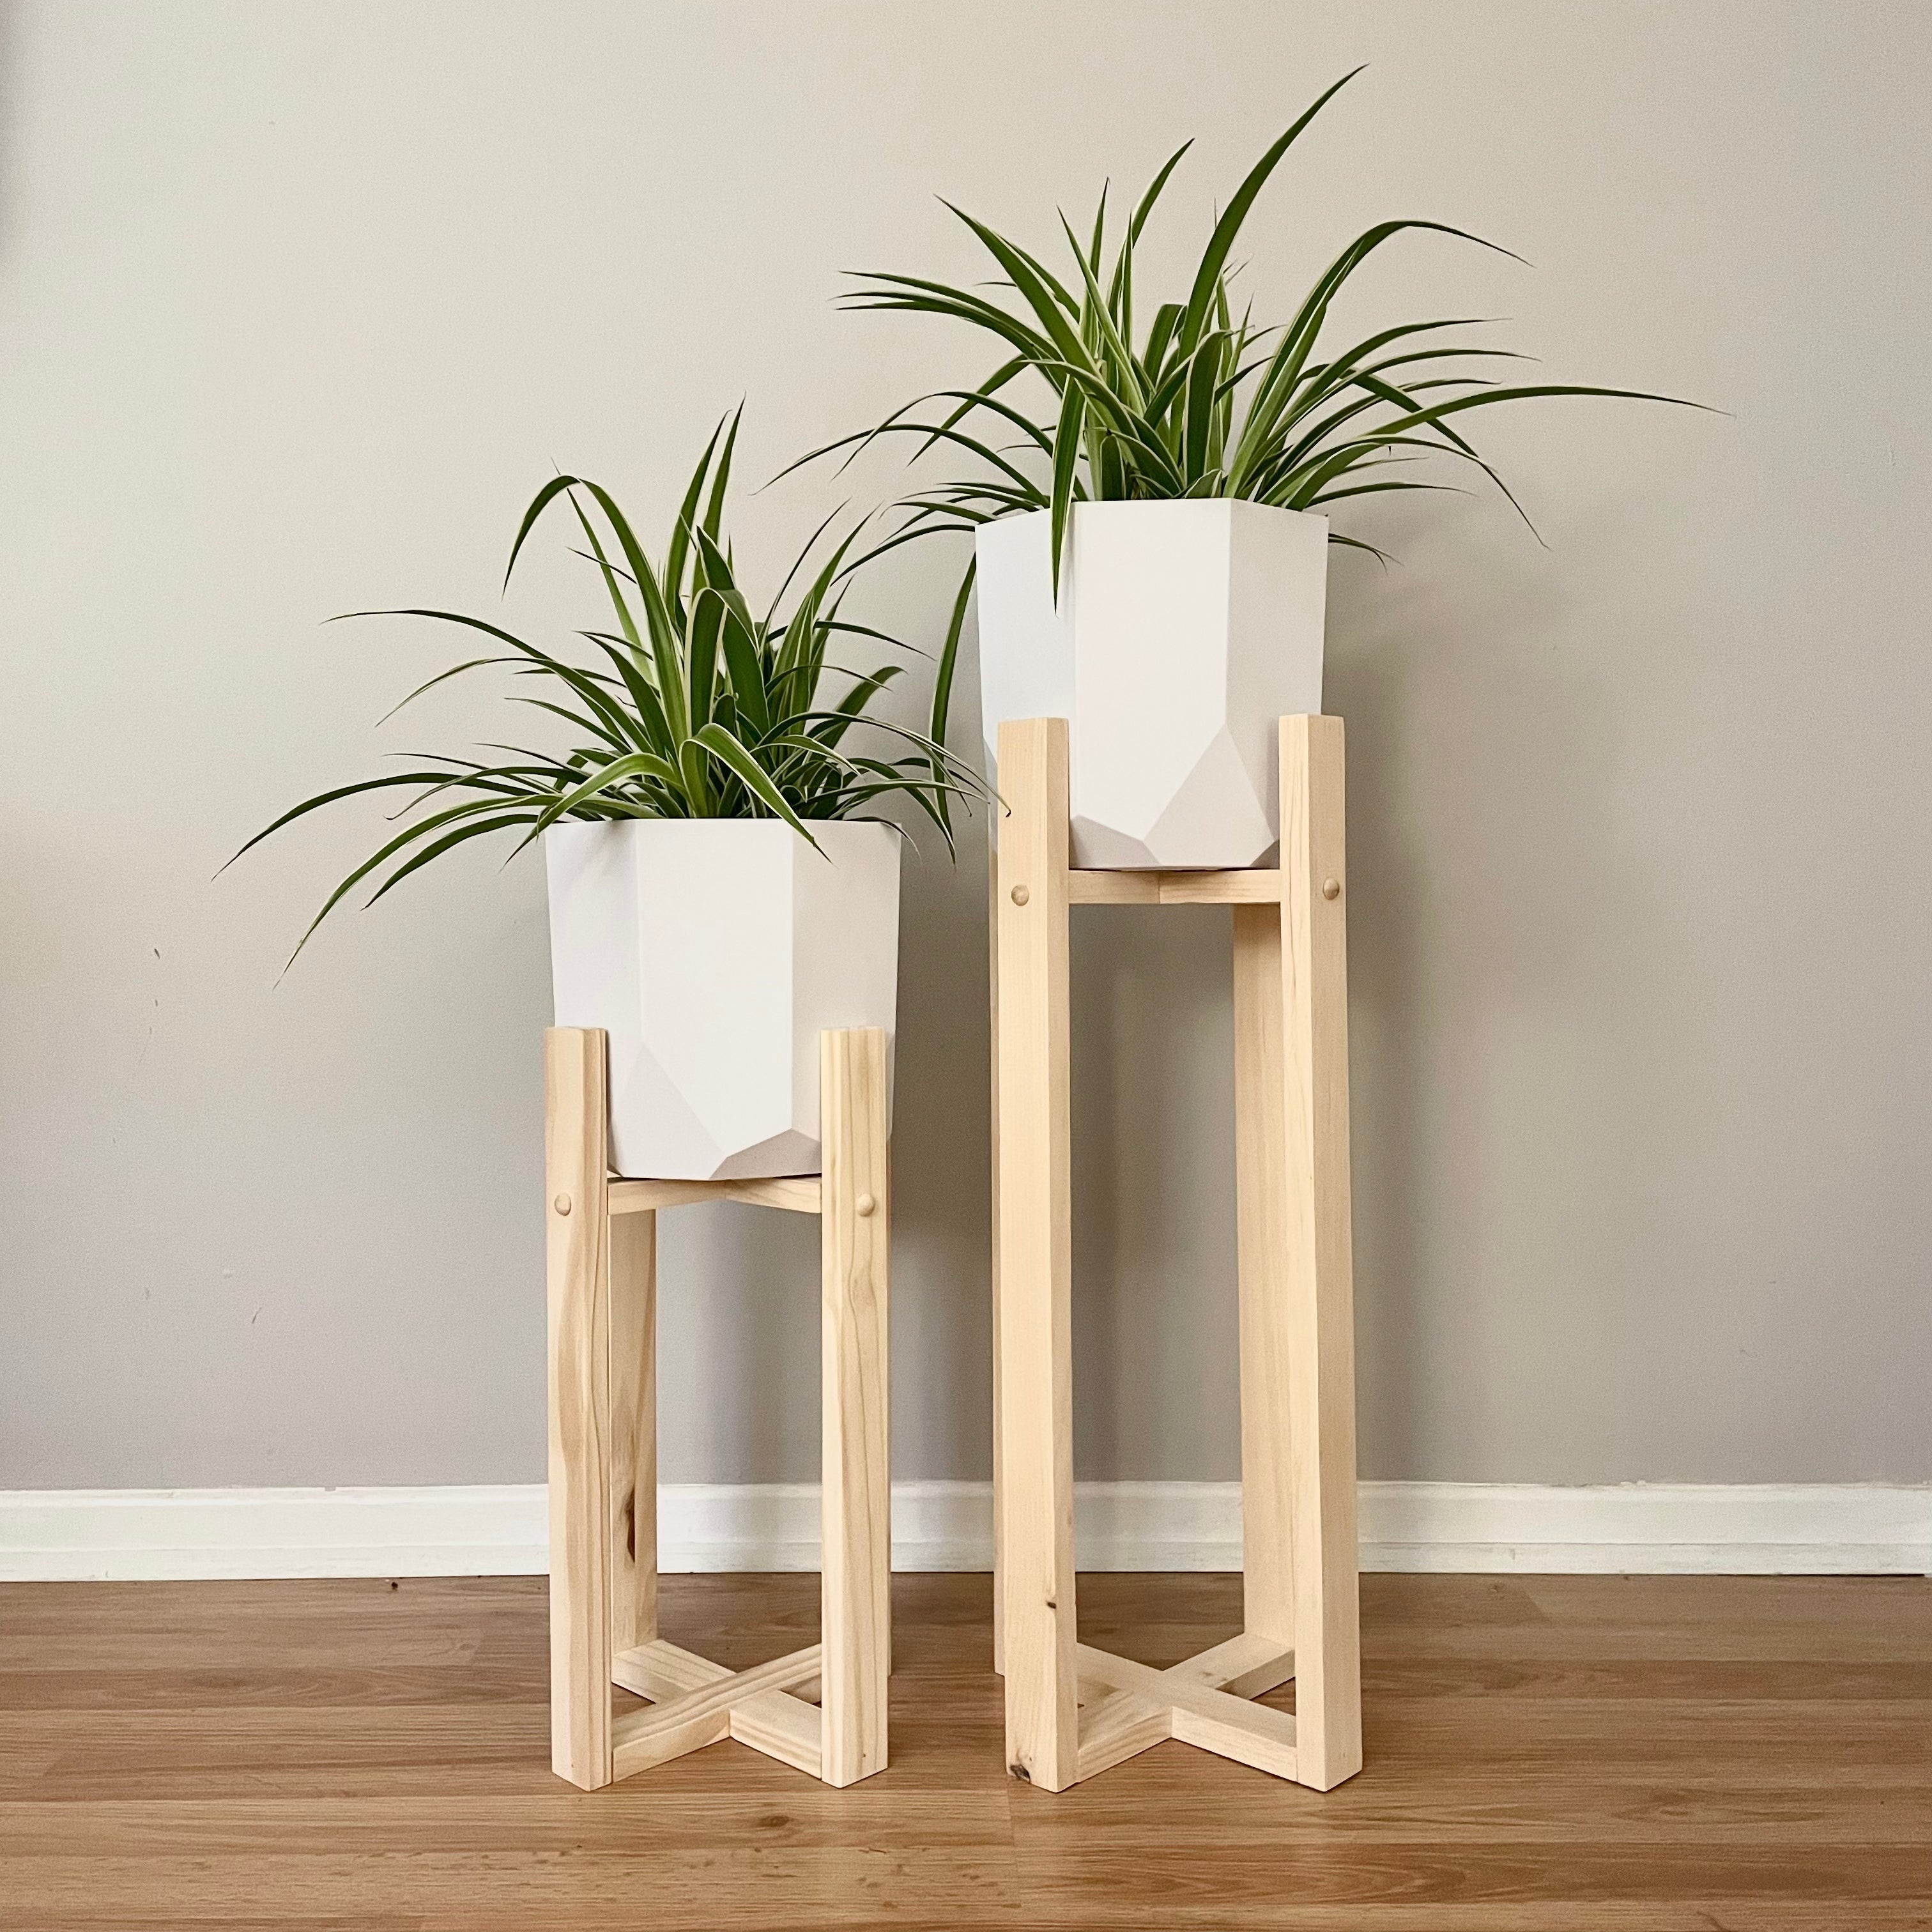 MIX & MATCH: Natural Pine Plant Stands Project Pine Designs MED + LG Plant Stands + 2 Plant Pots 